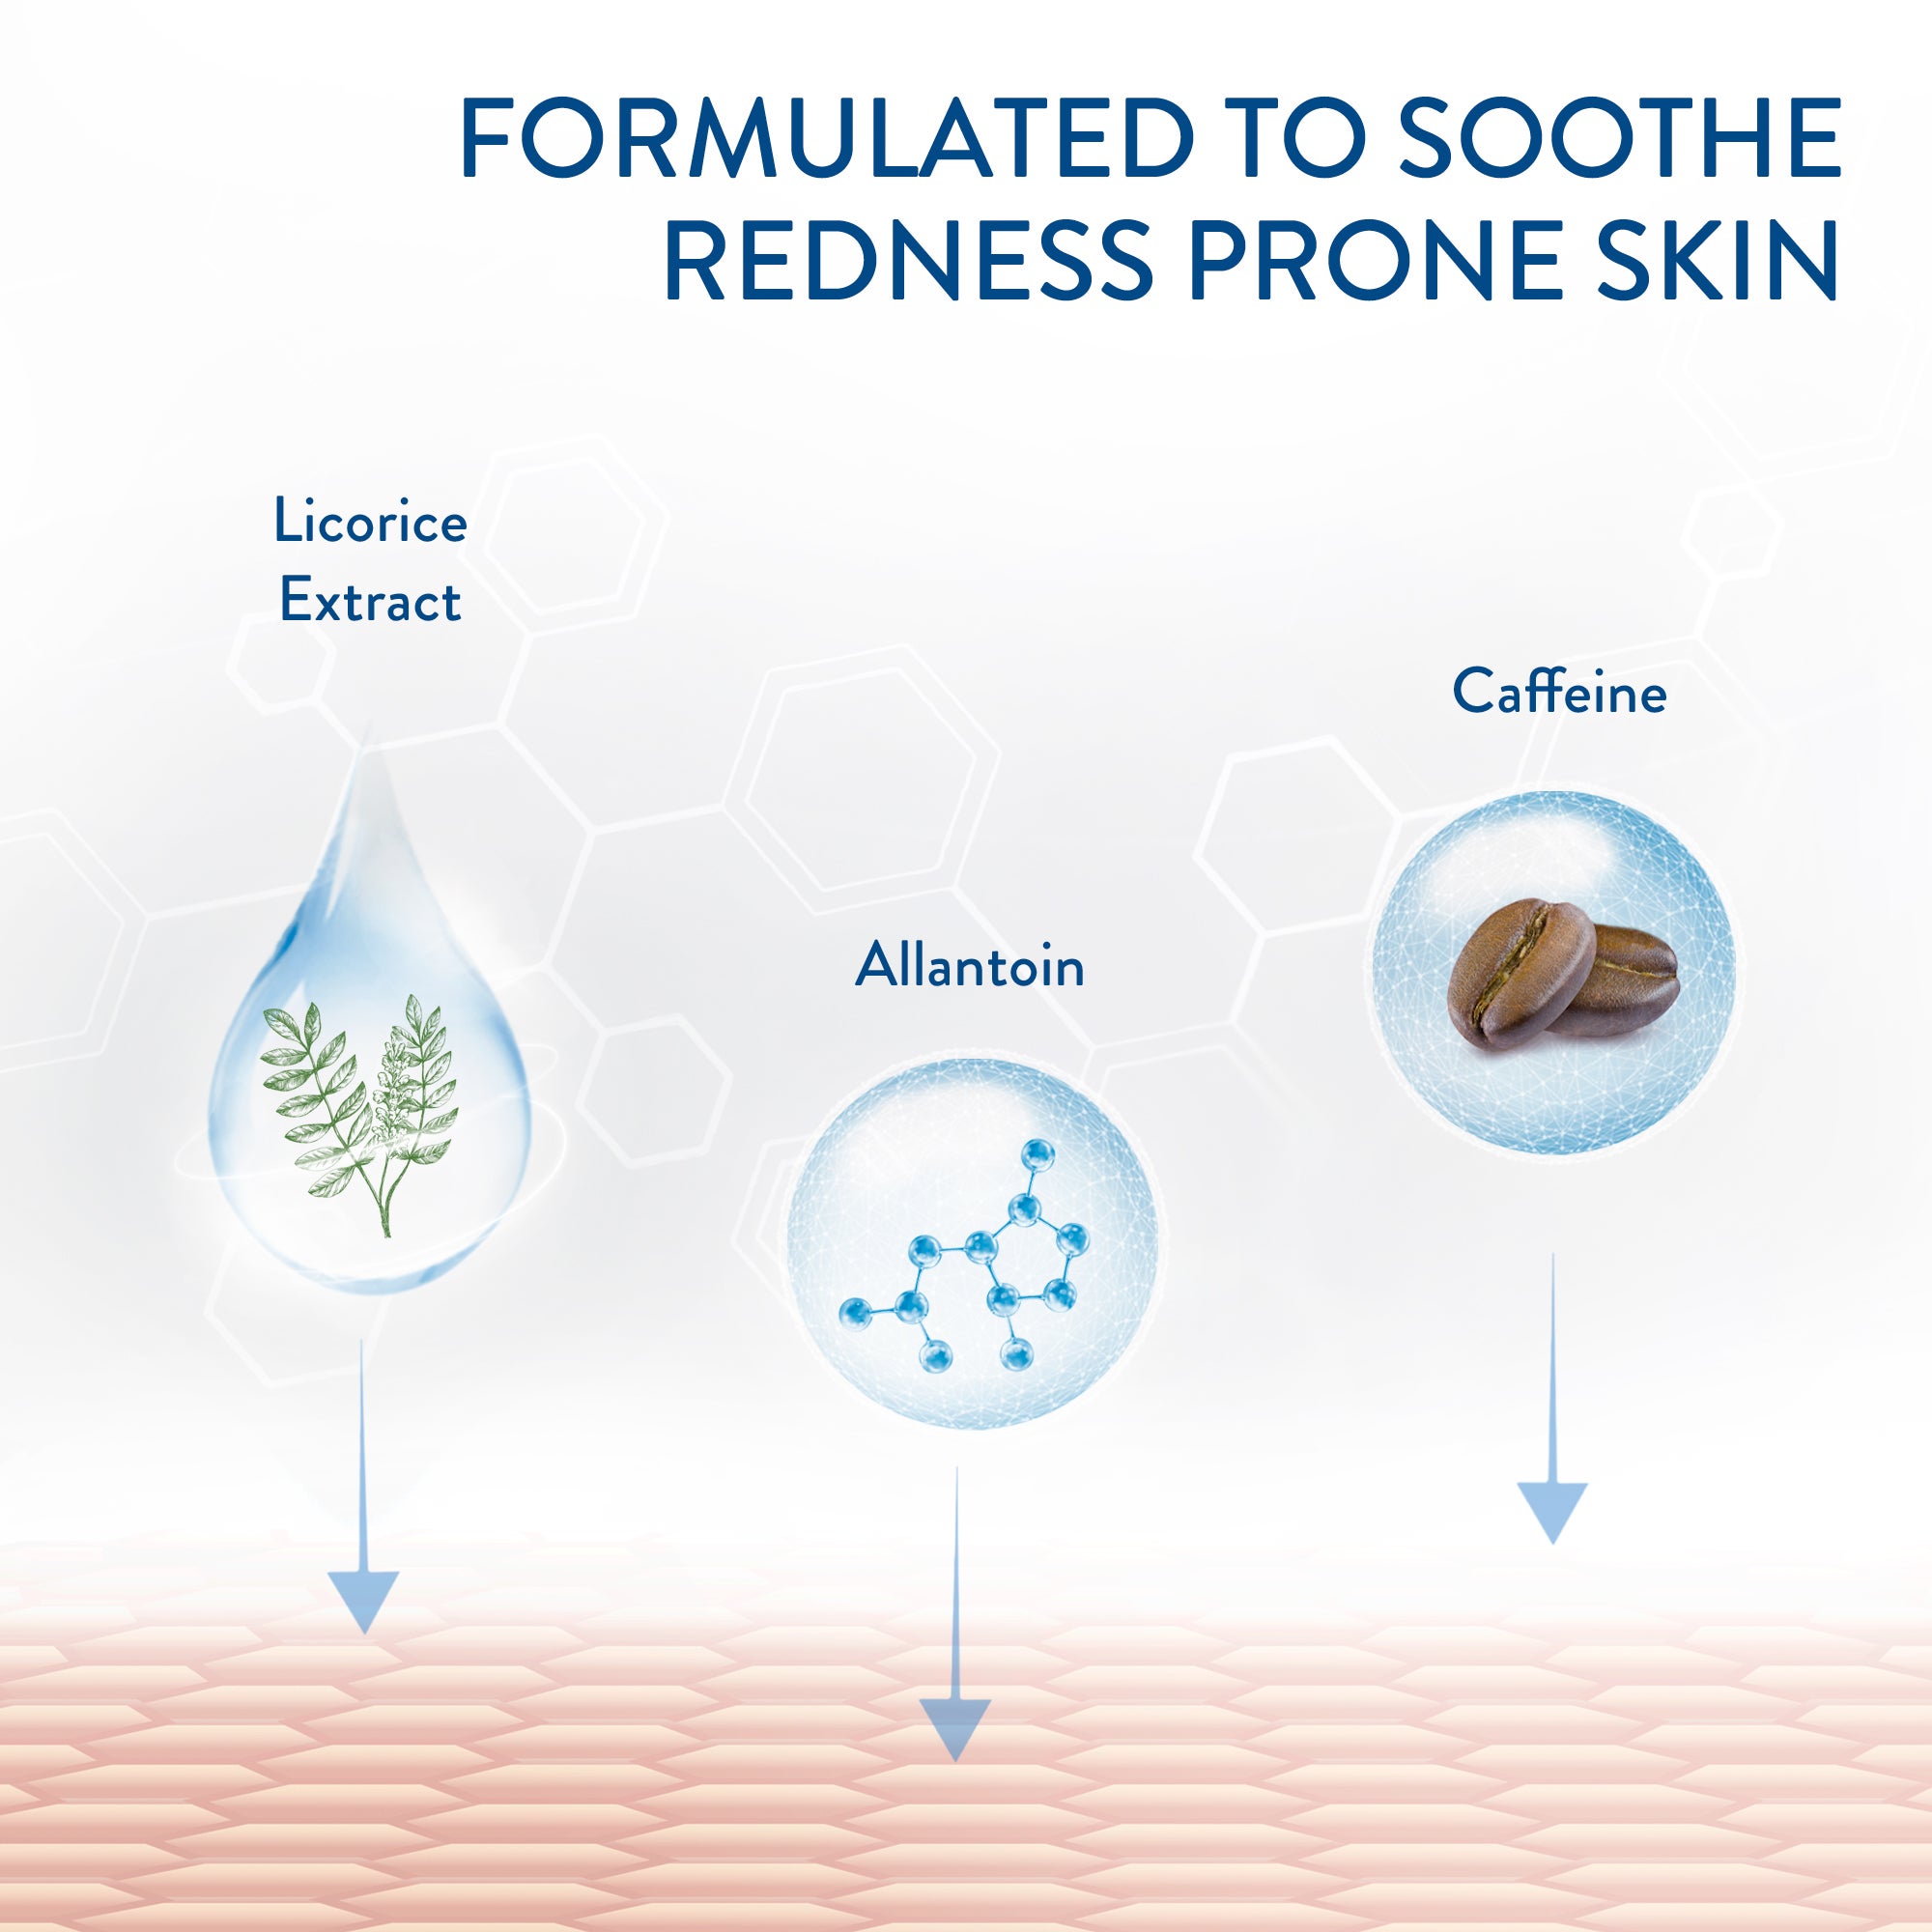 Foaming Face Wash for Redness Prone Skin Ingredients